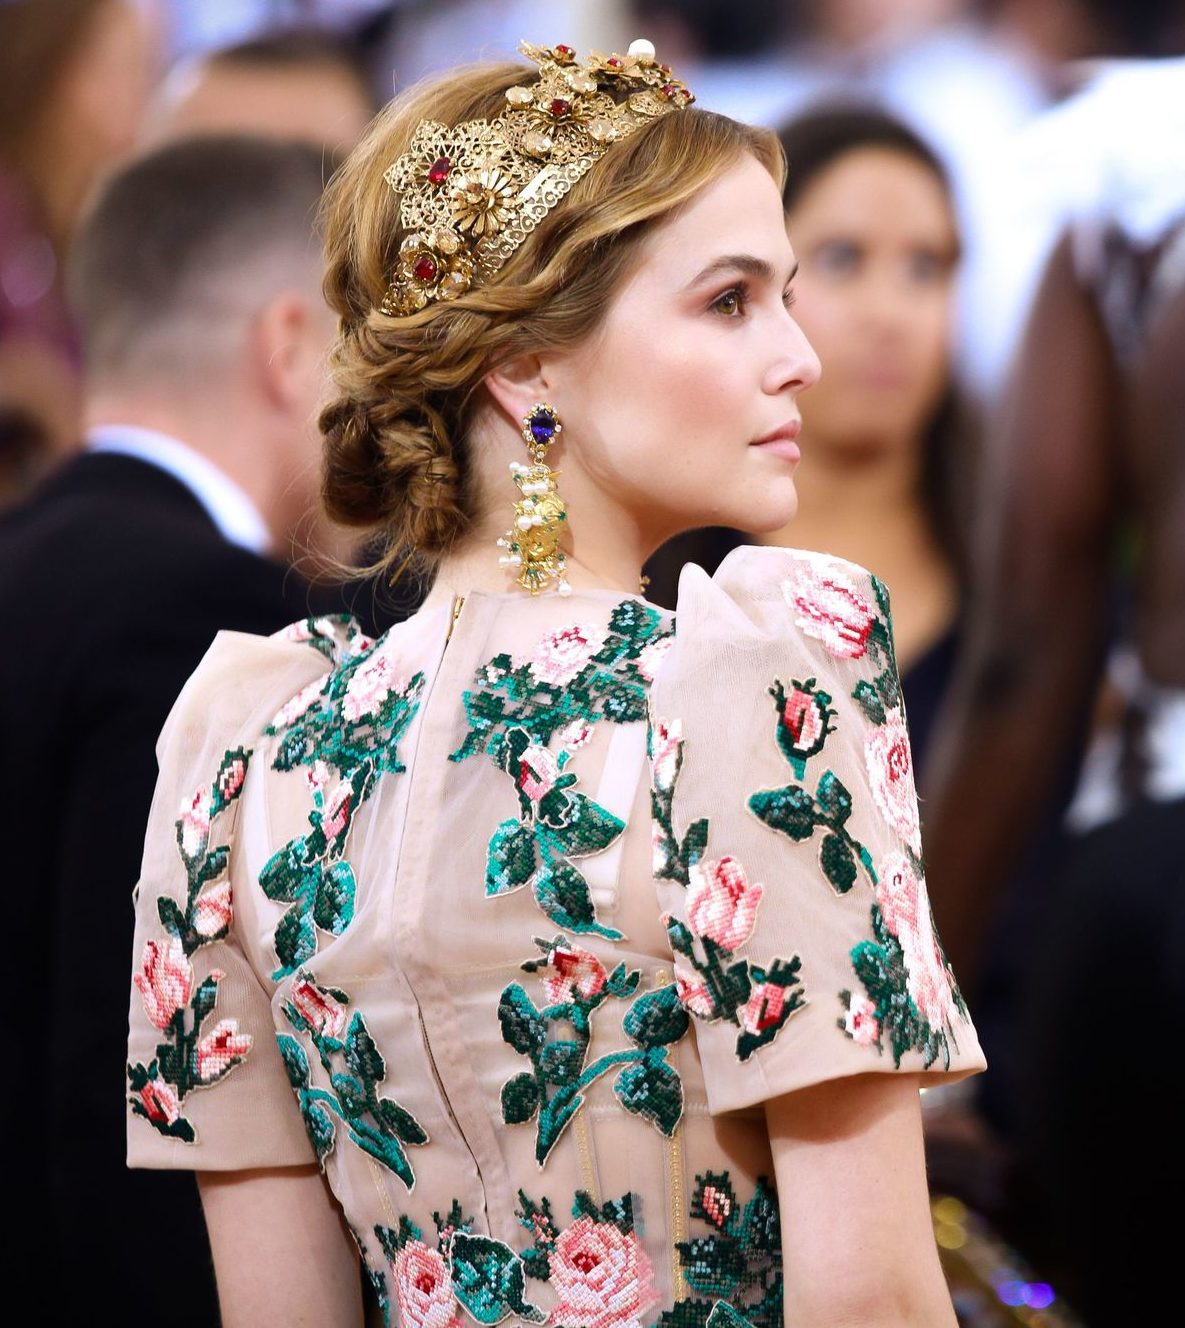 zoey deutch with light brown hair in a braided hairstyle wearing a tiara at the MET gala